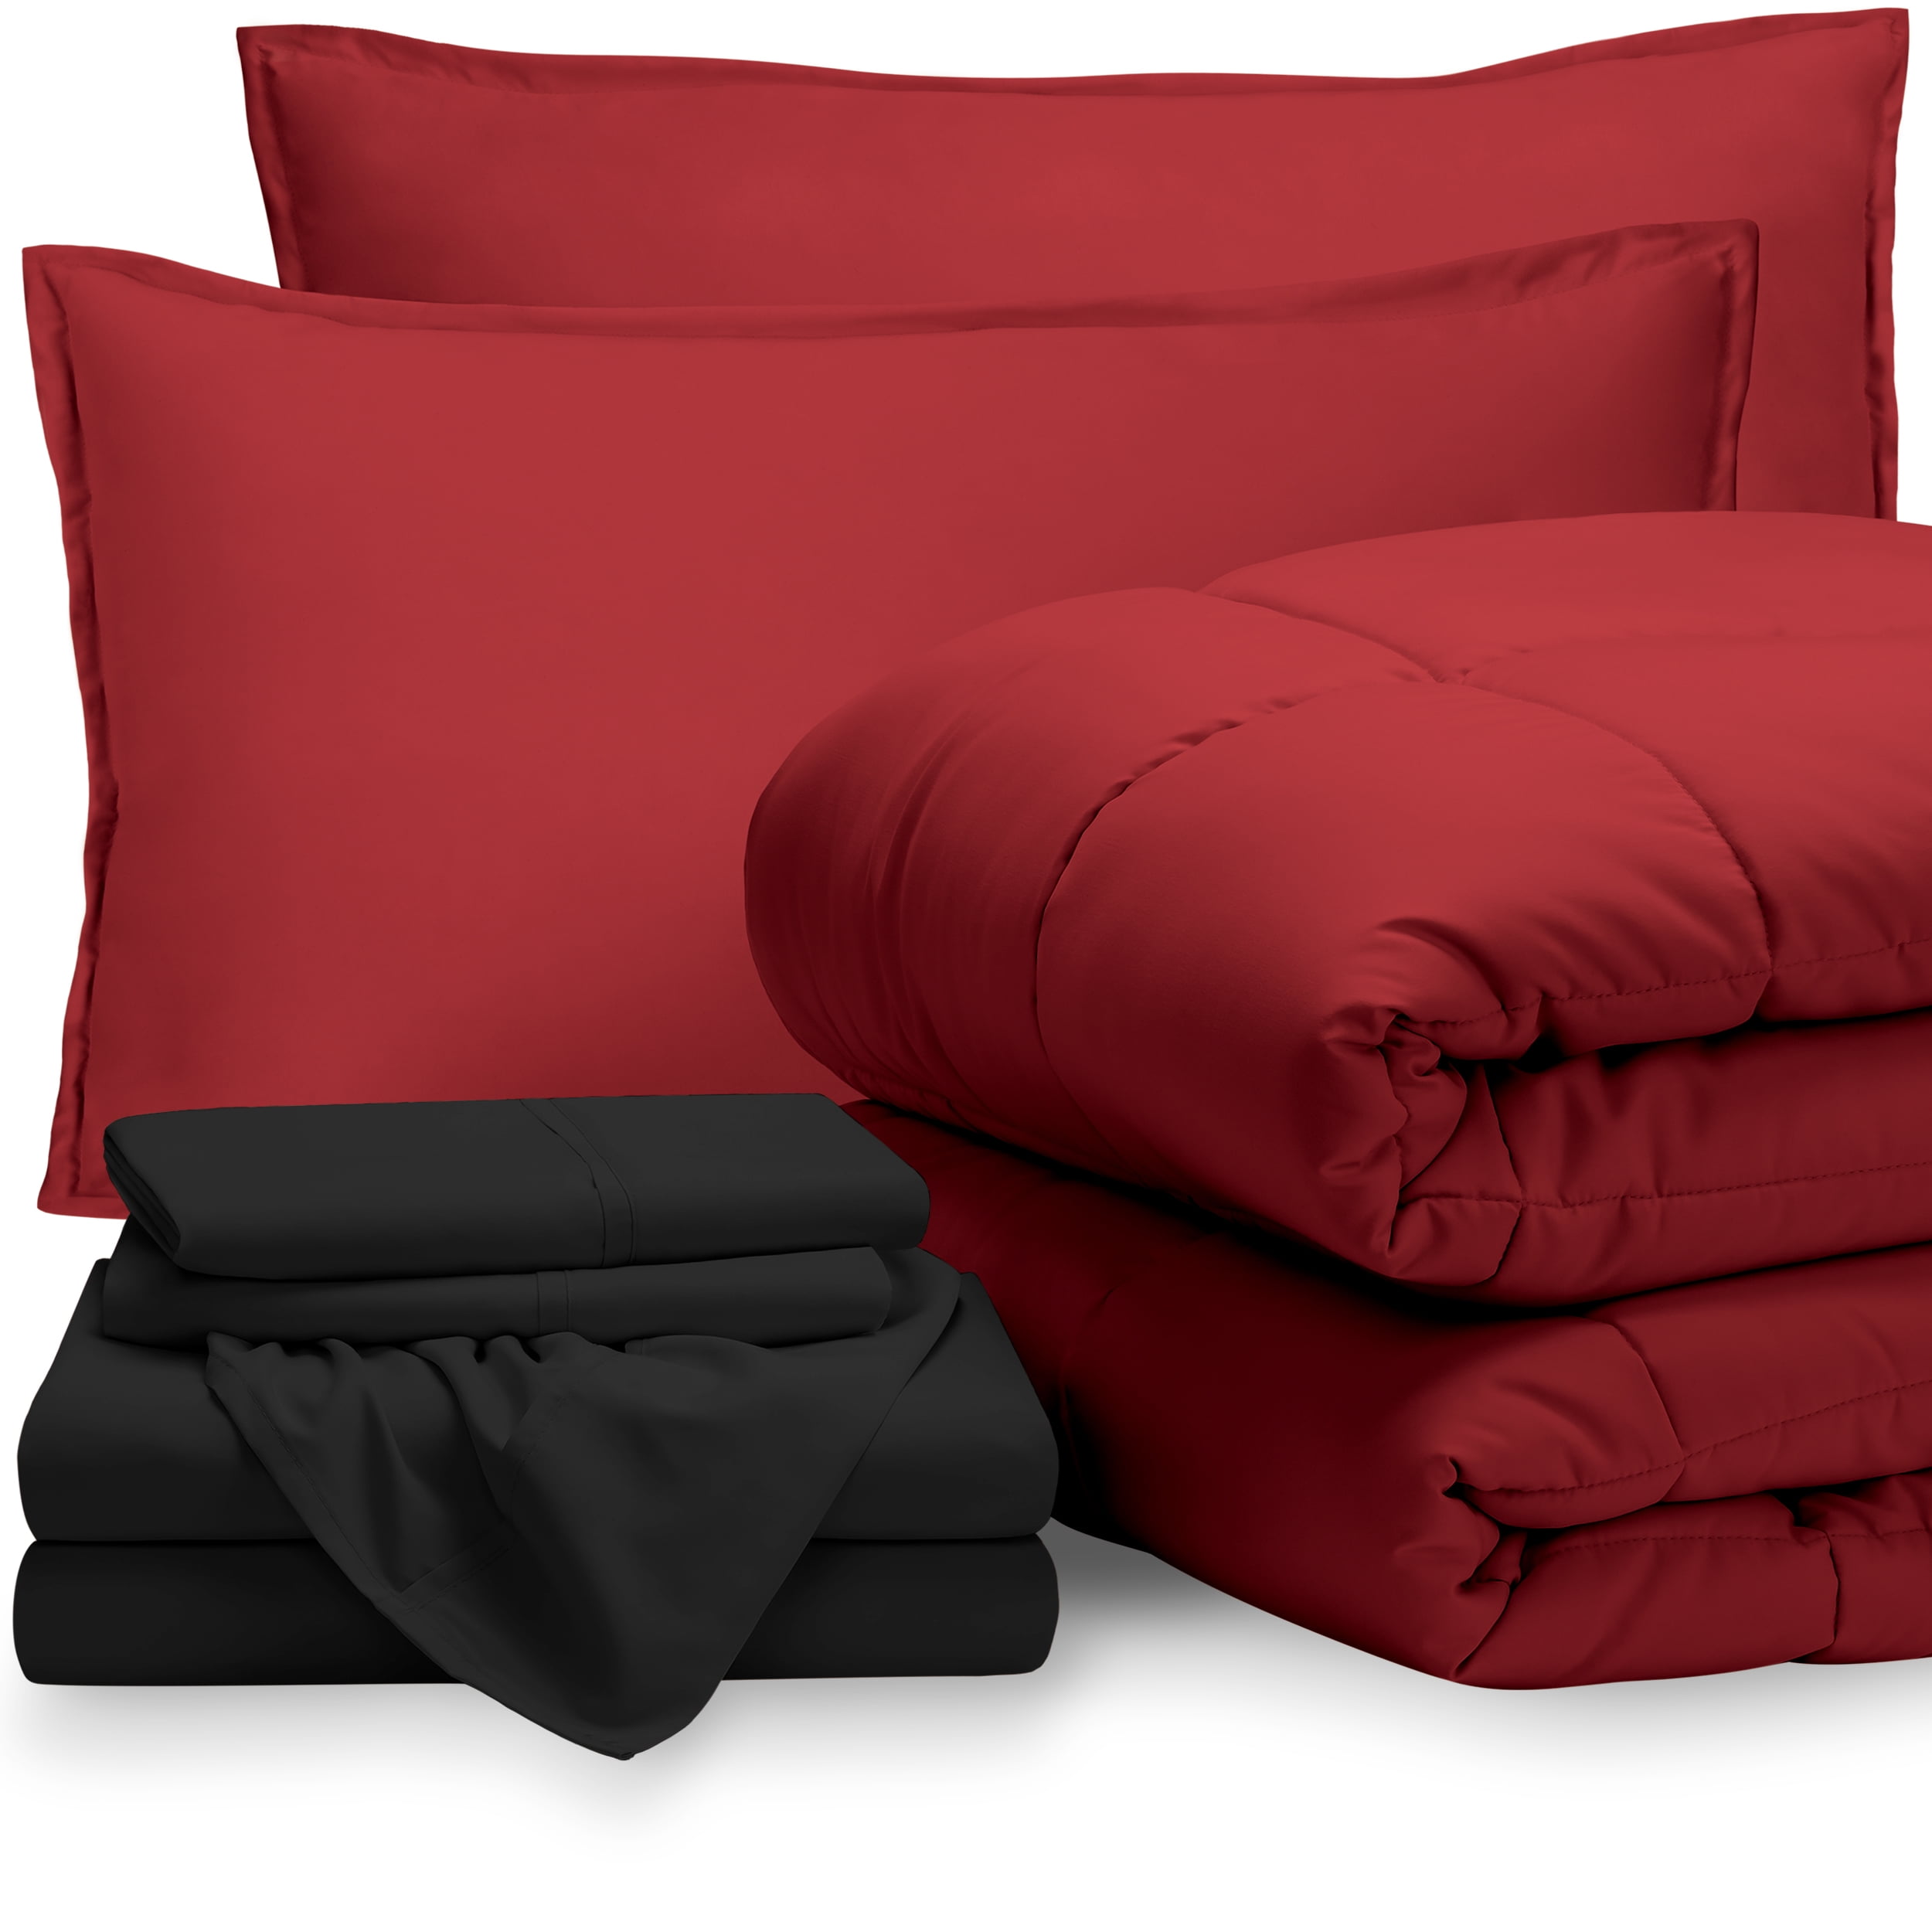 7 Piece Bed In A Bag King Comforter, Red Bed In A Bag King Size